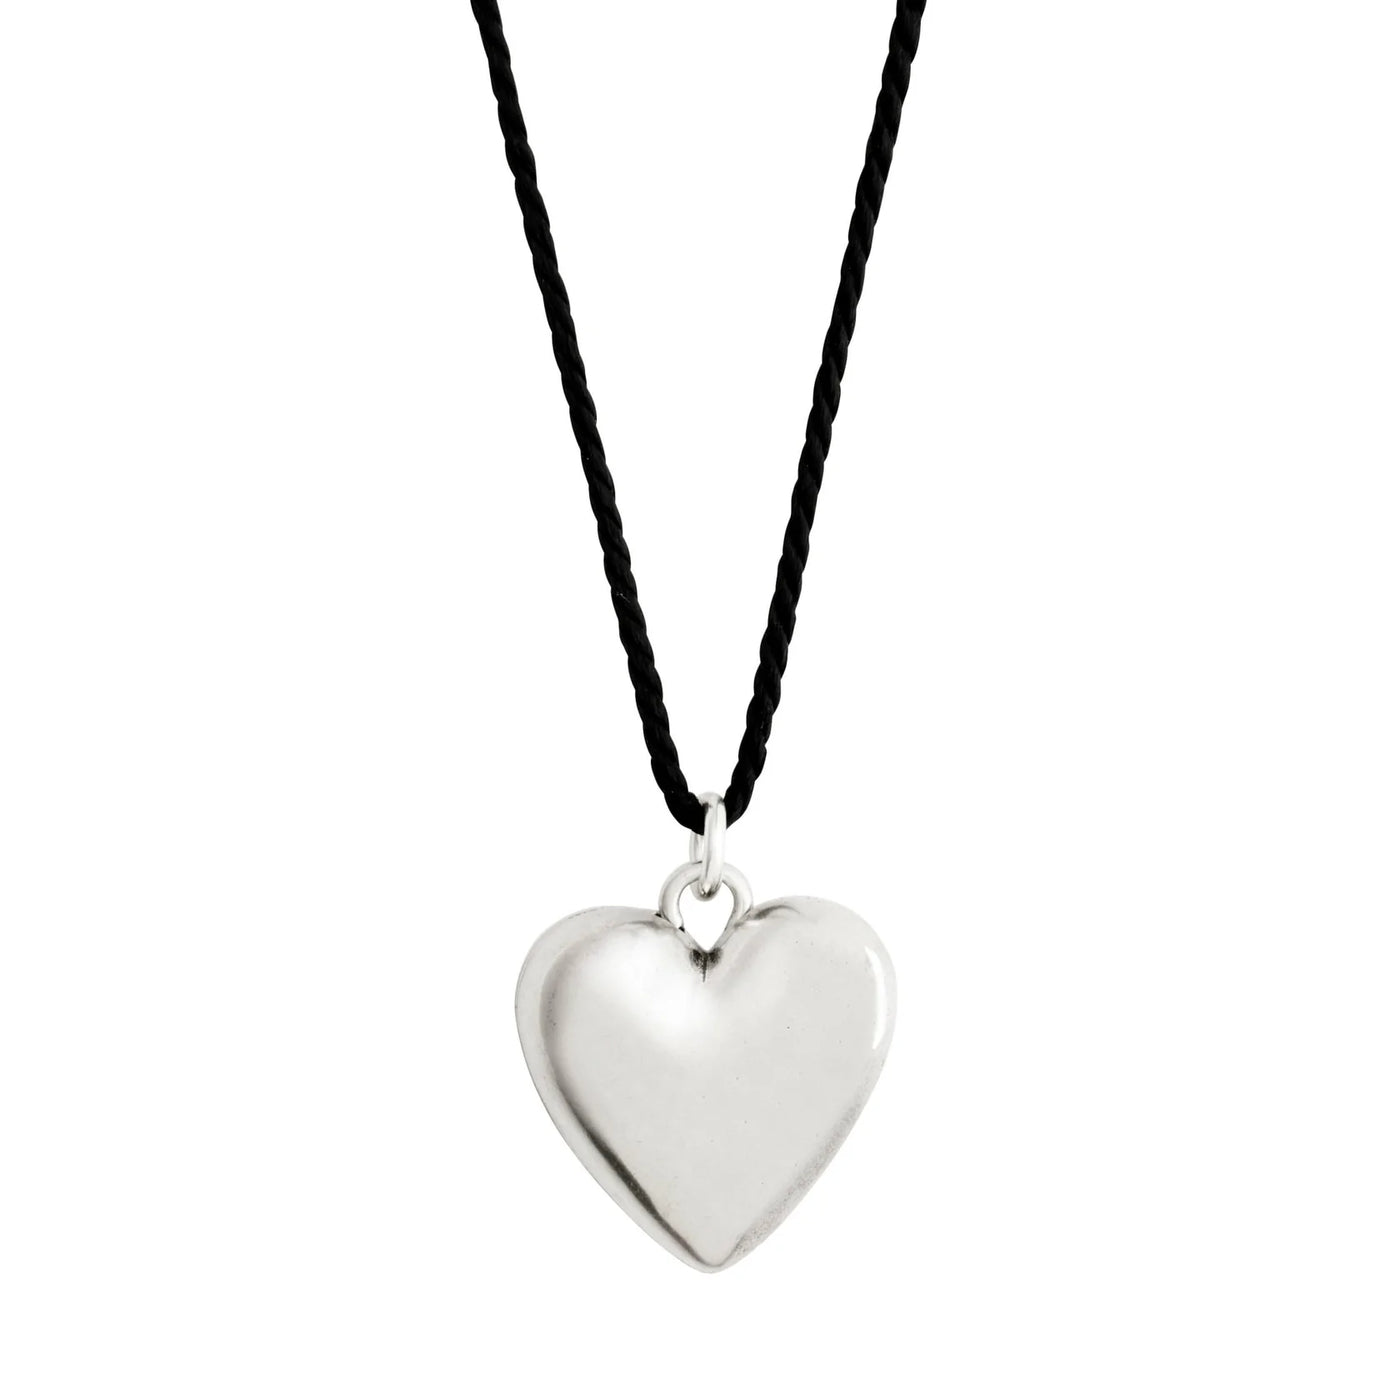 Reflect Heart Necklace, Silver